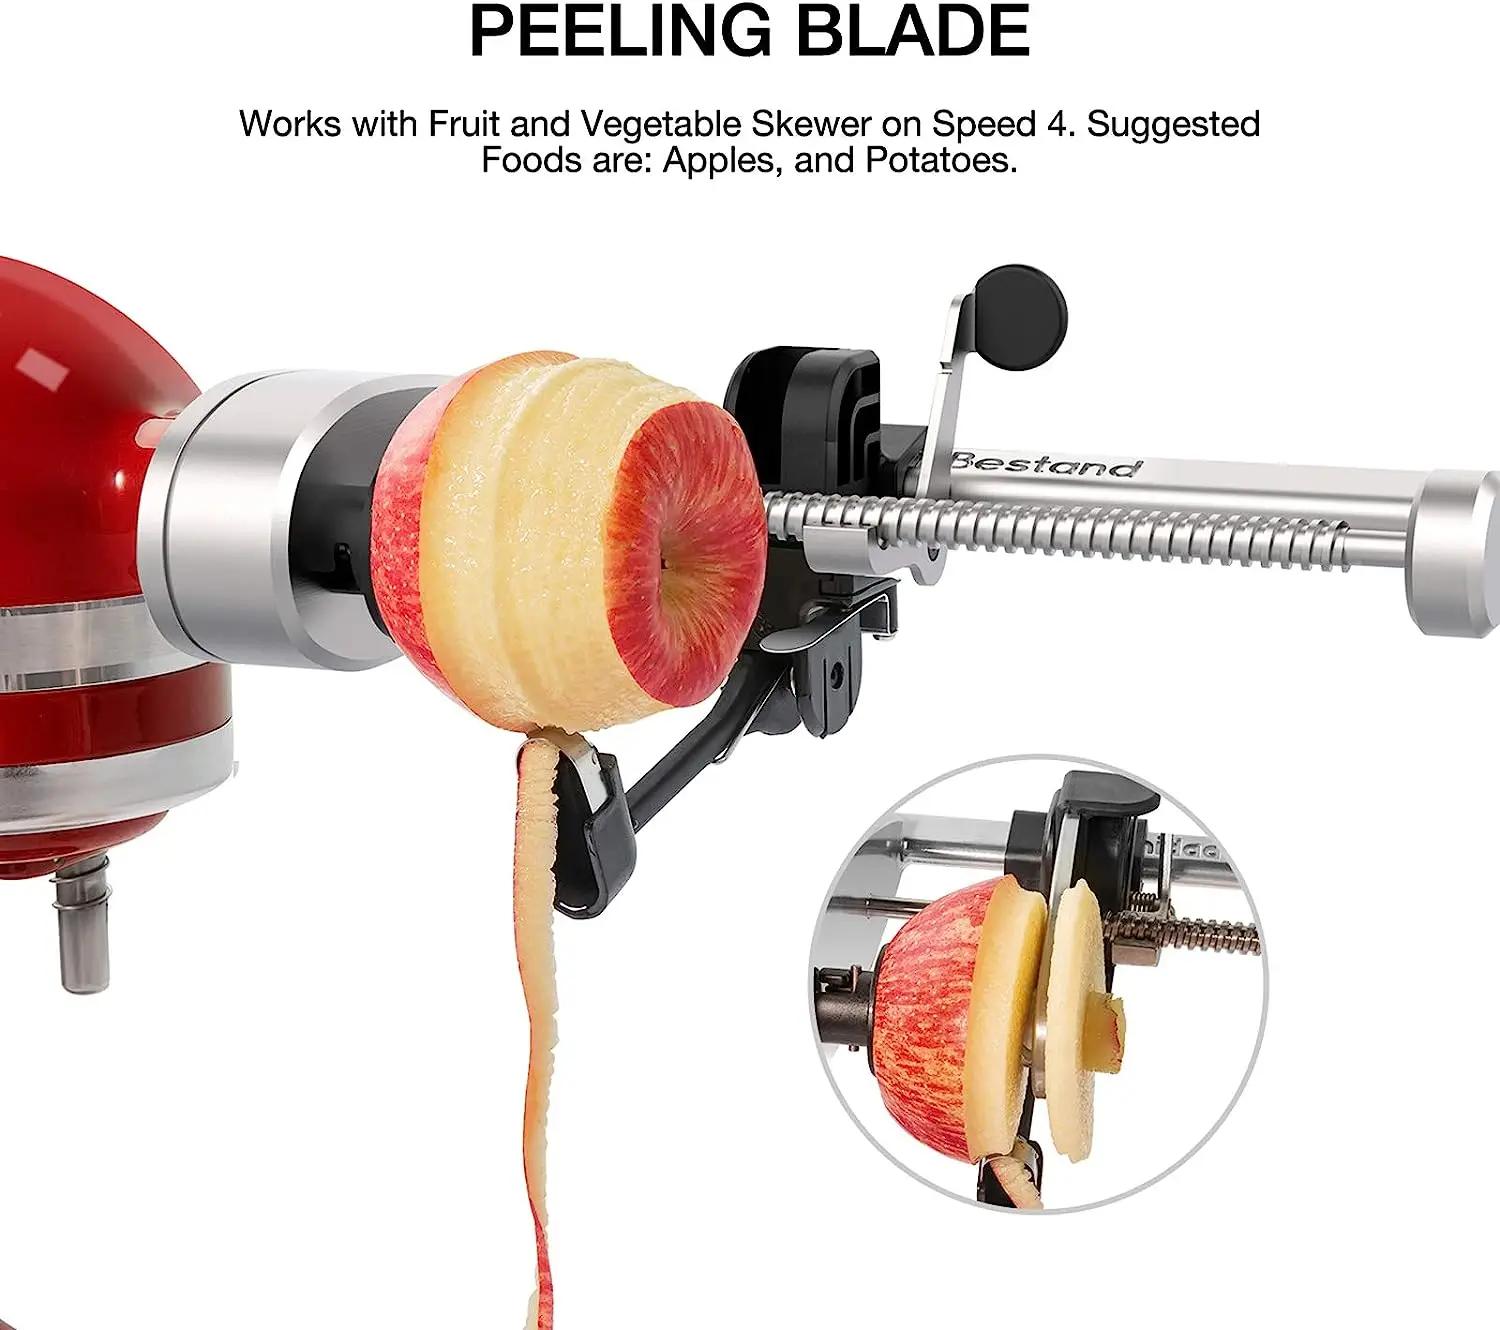 KitchenAid 5 Blade Spiralizer with Peel, Core and Slice Metal